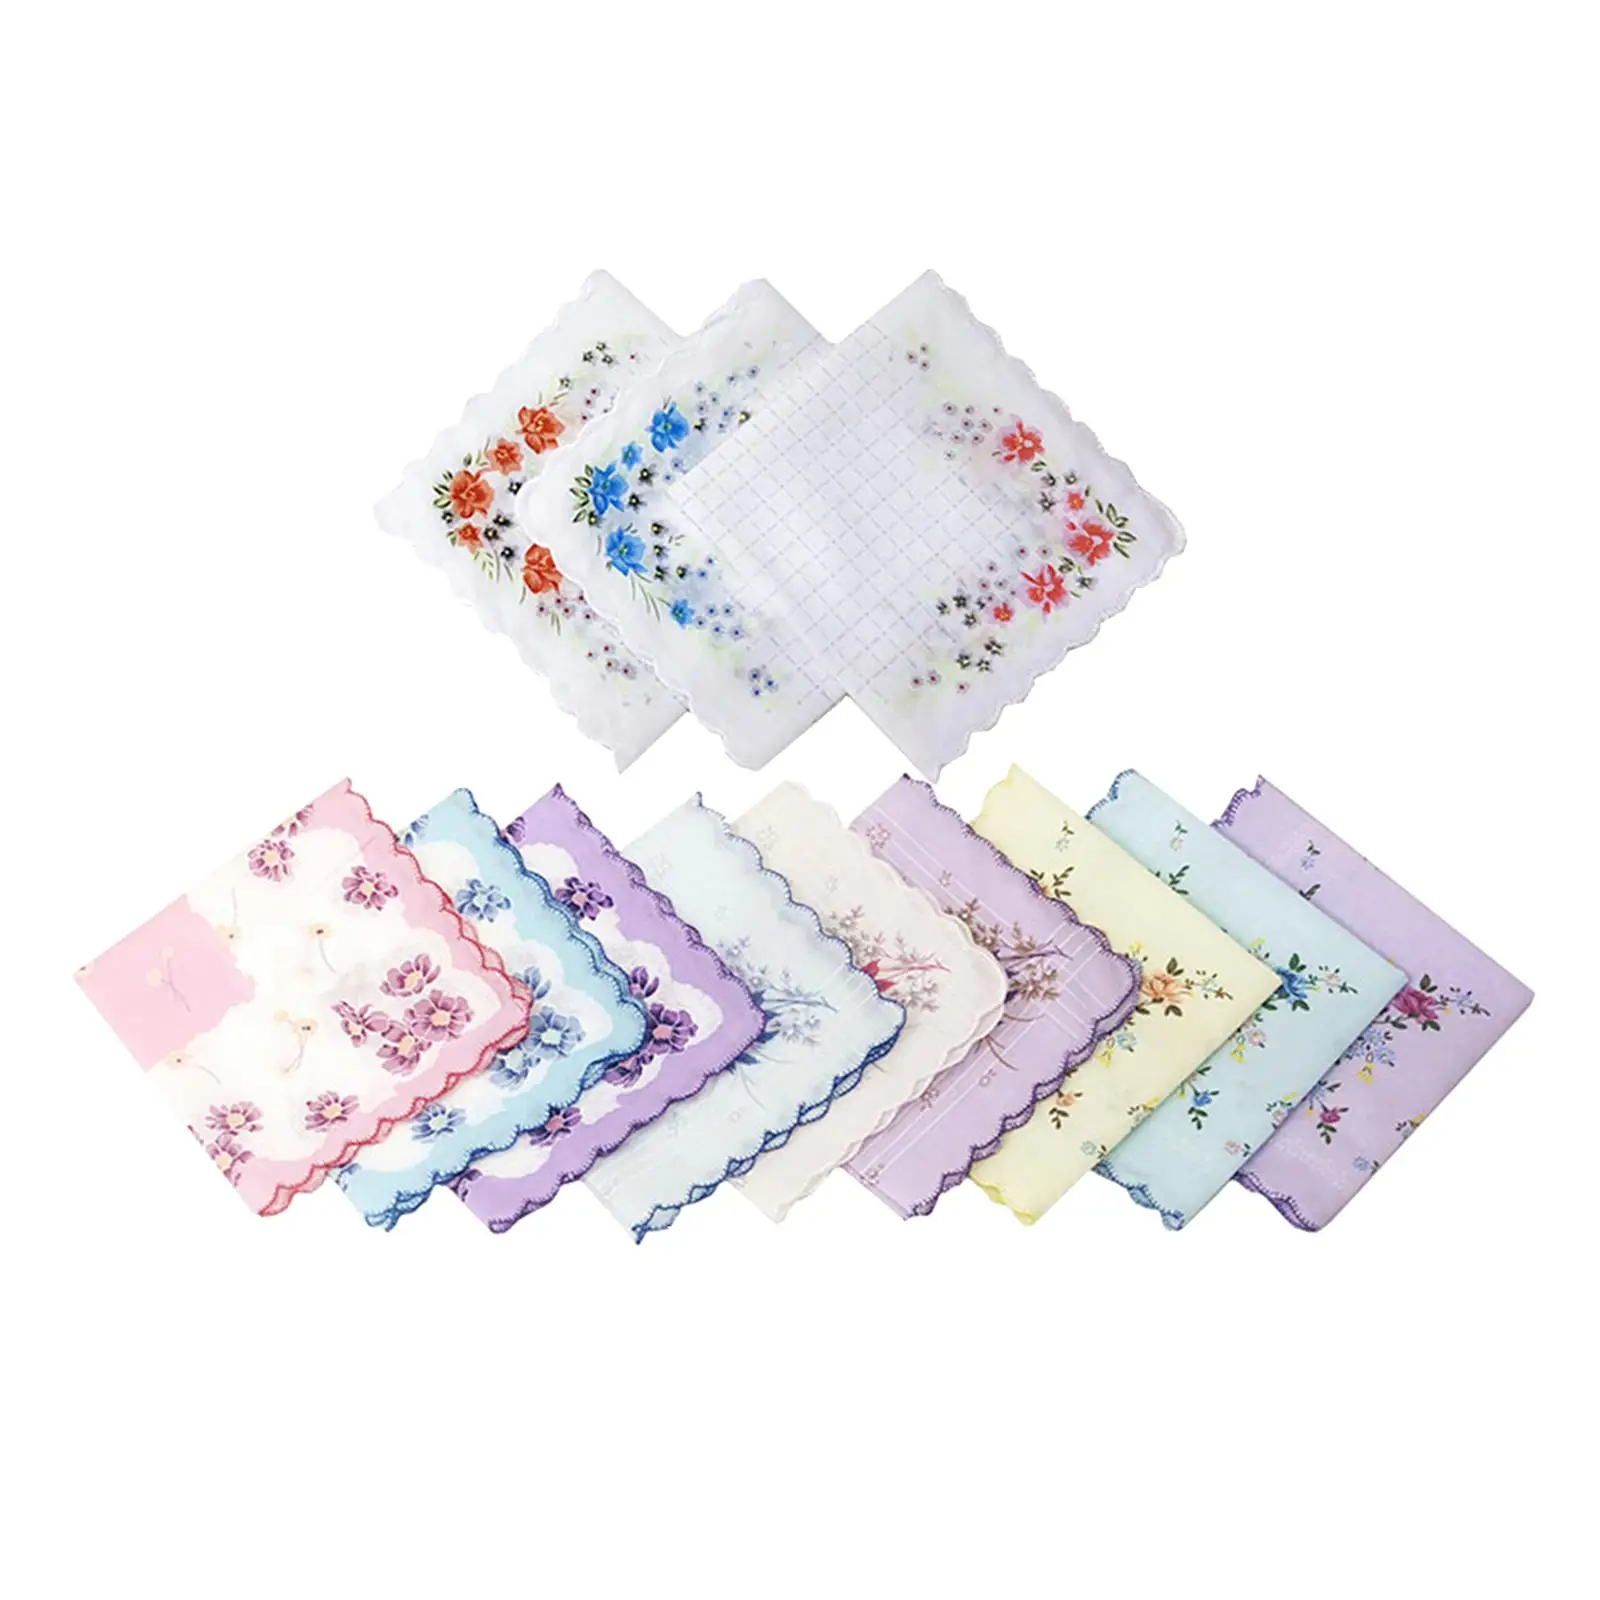 Womens Handkerchiefs Mixed Style and Color Cotton Printed Elegant Wavy Edge Pocket Hankies for Wedding Favors Gift Party 12